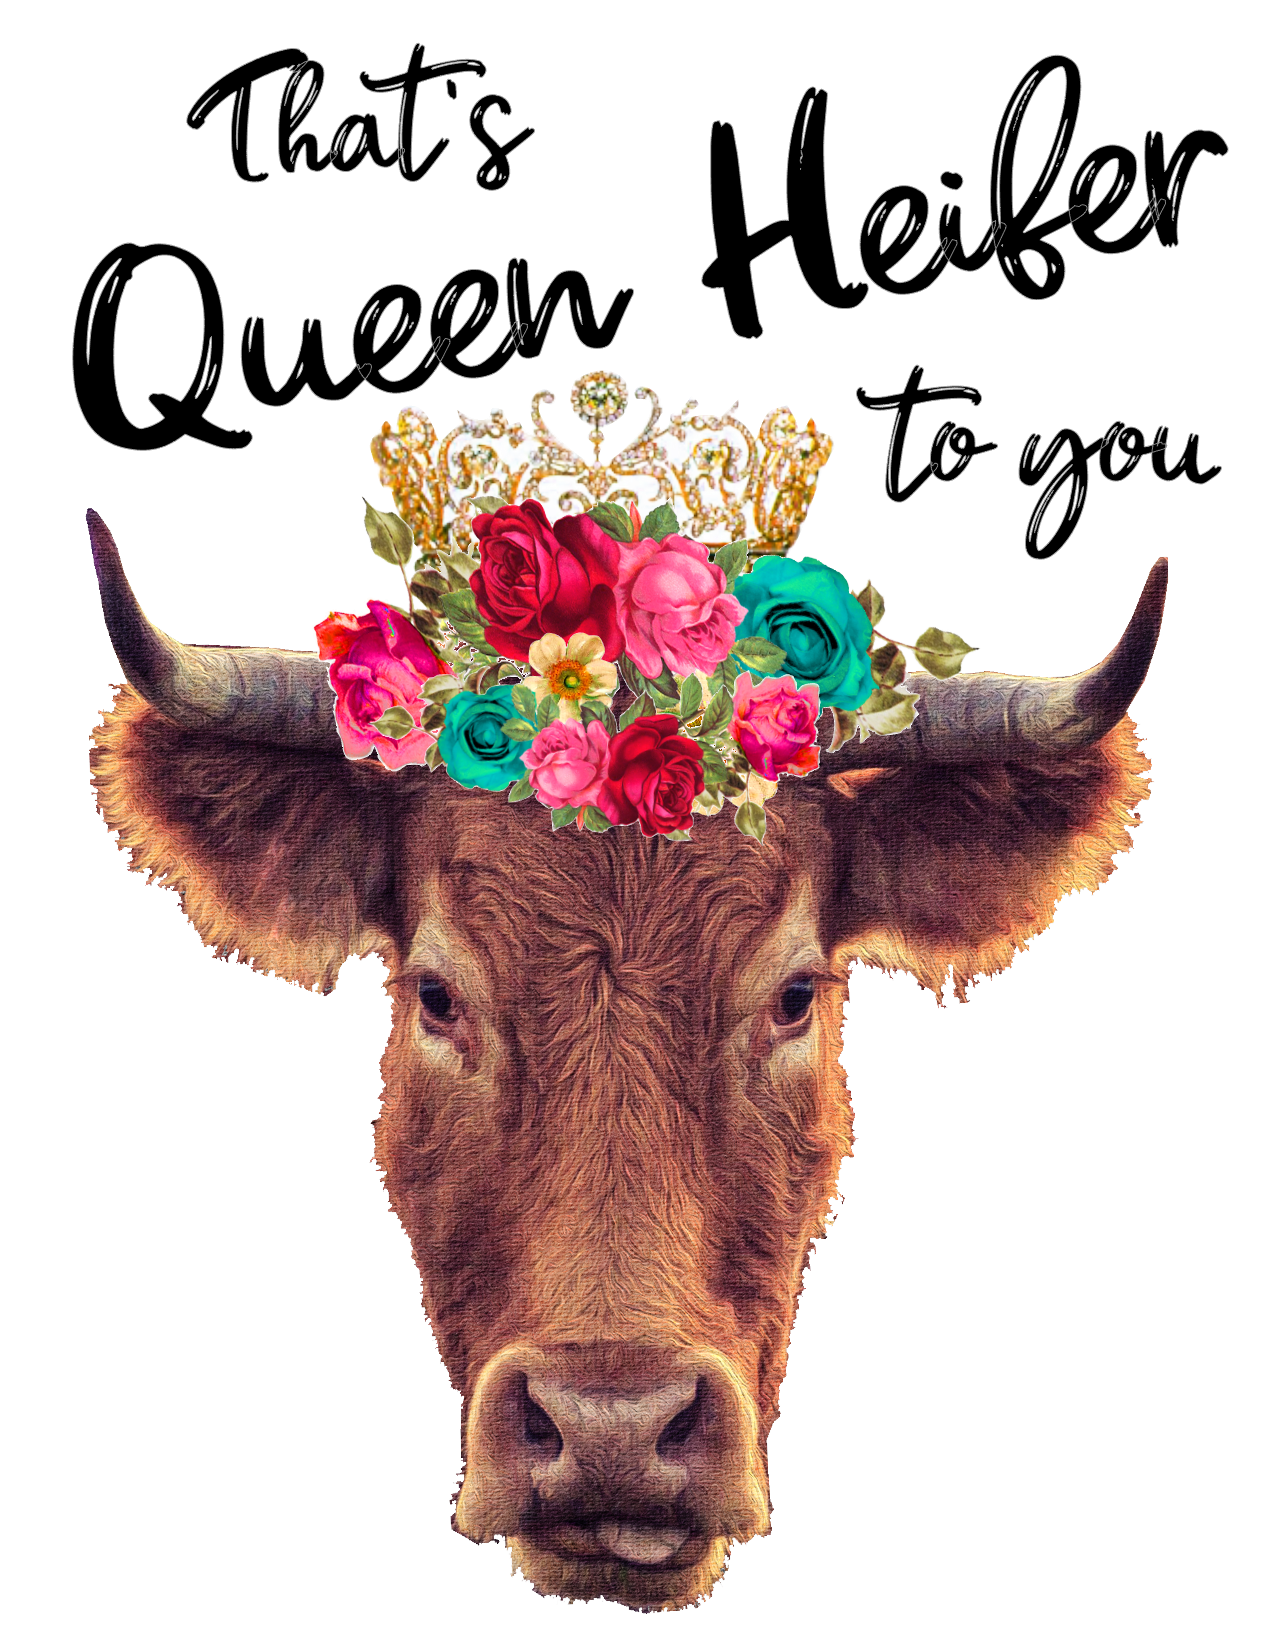 #148 That's Queen Heifer to you